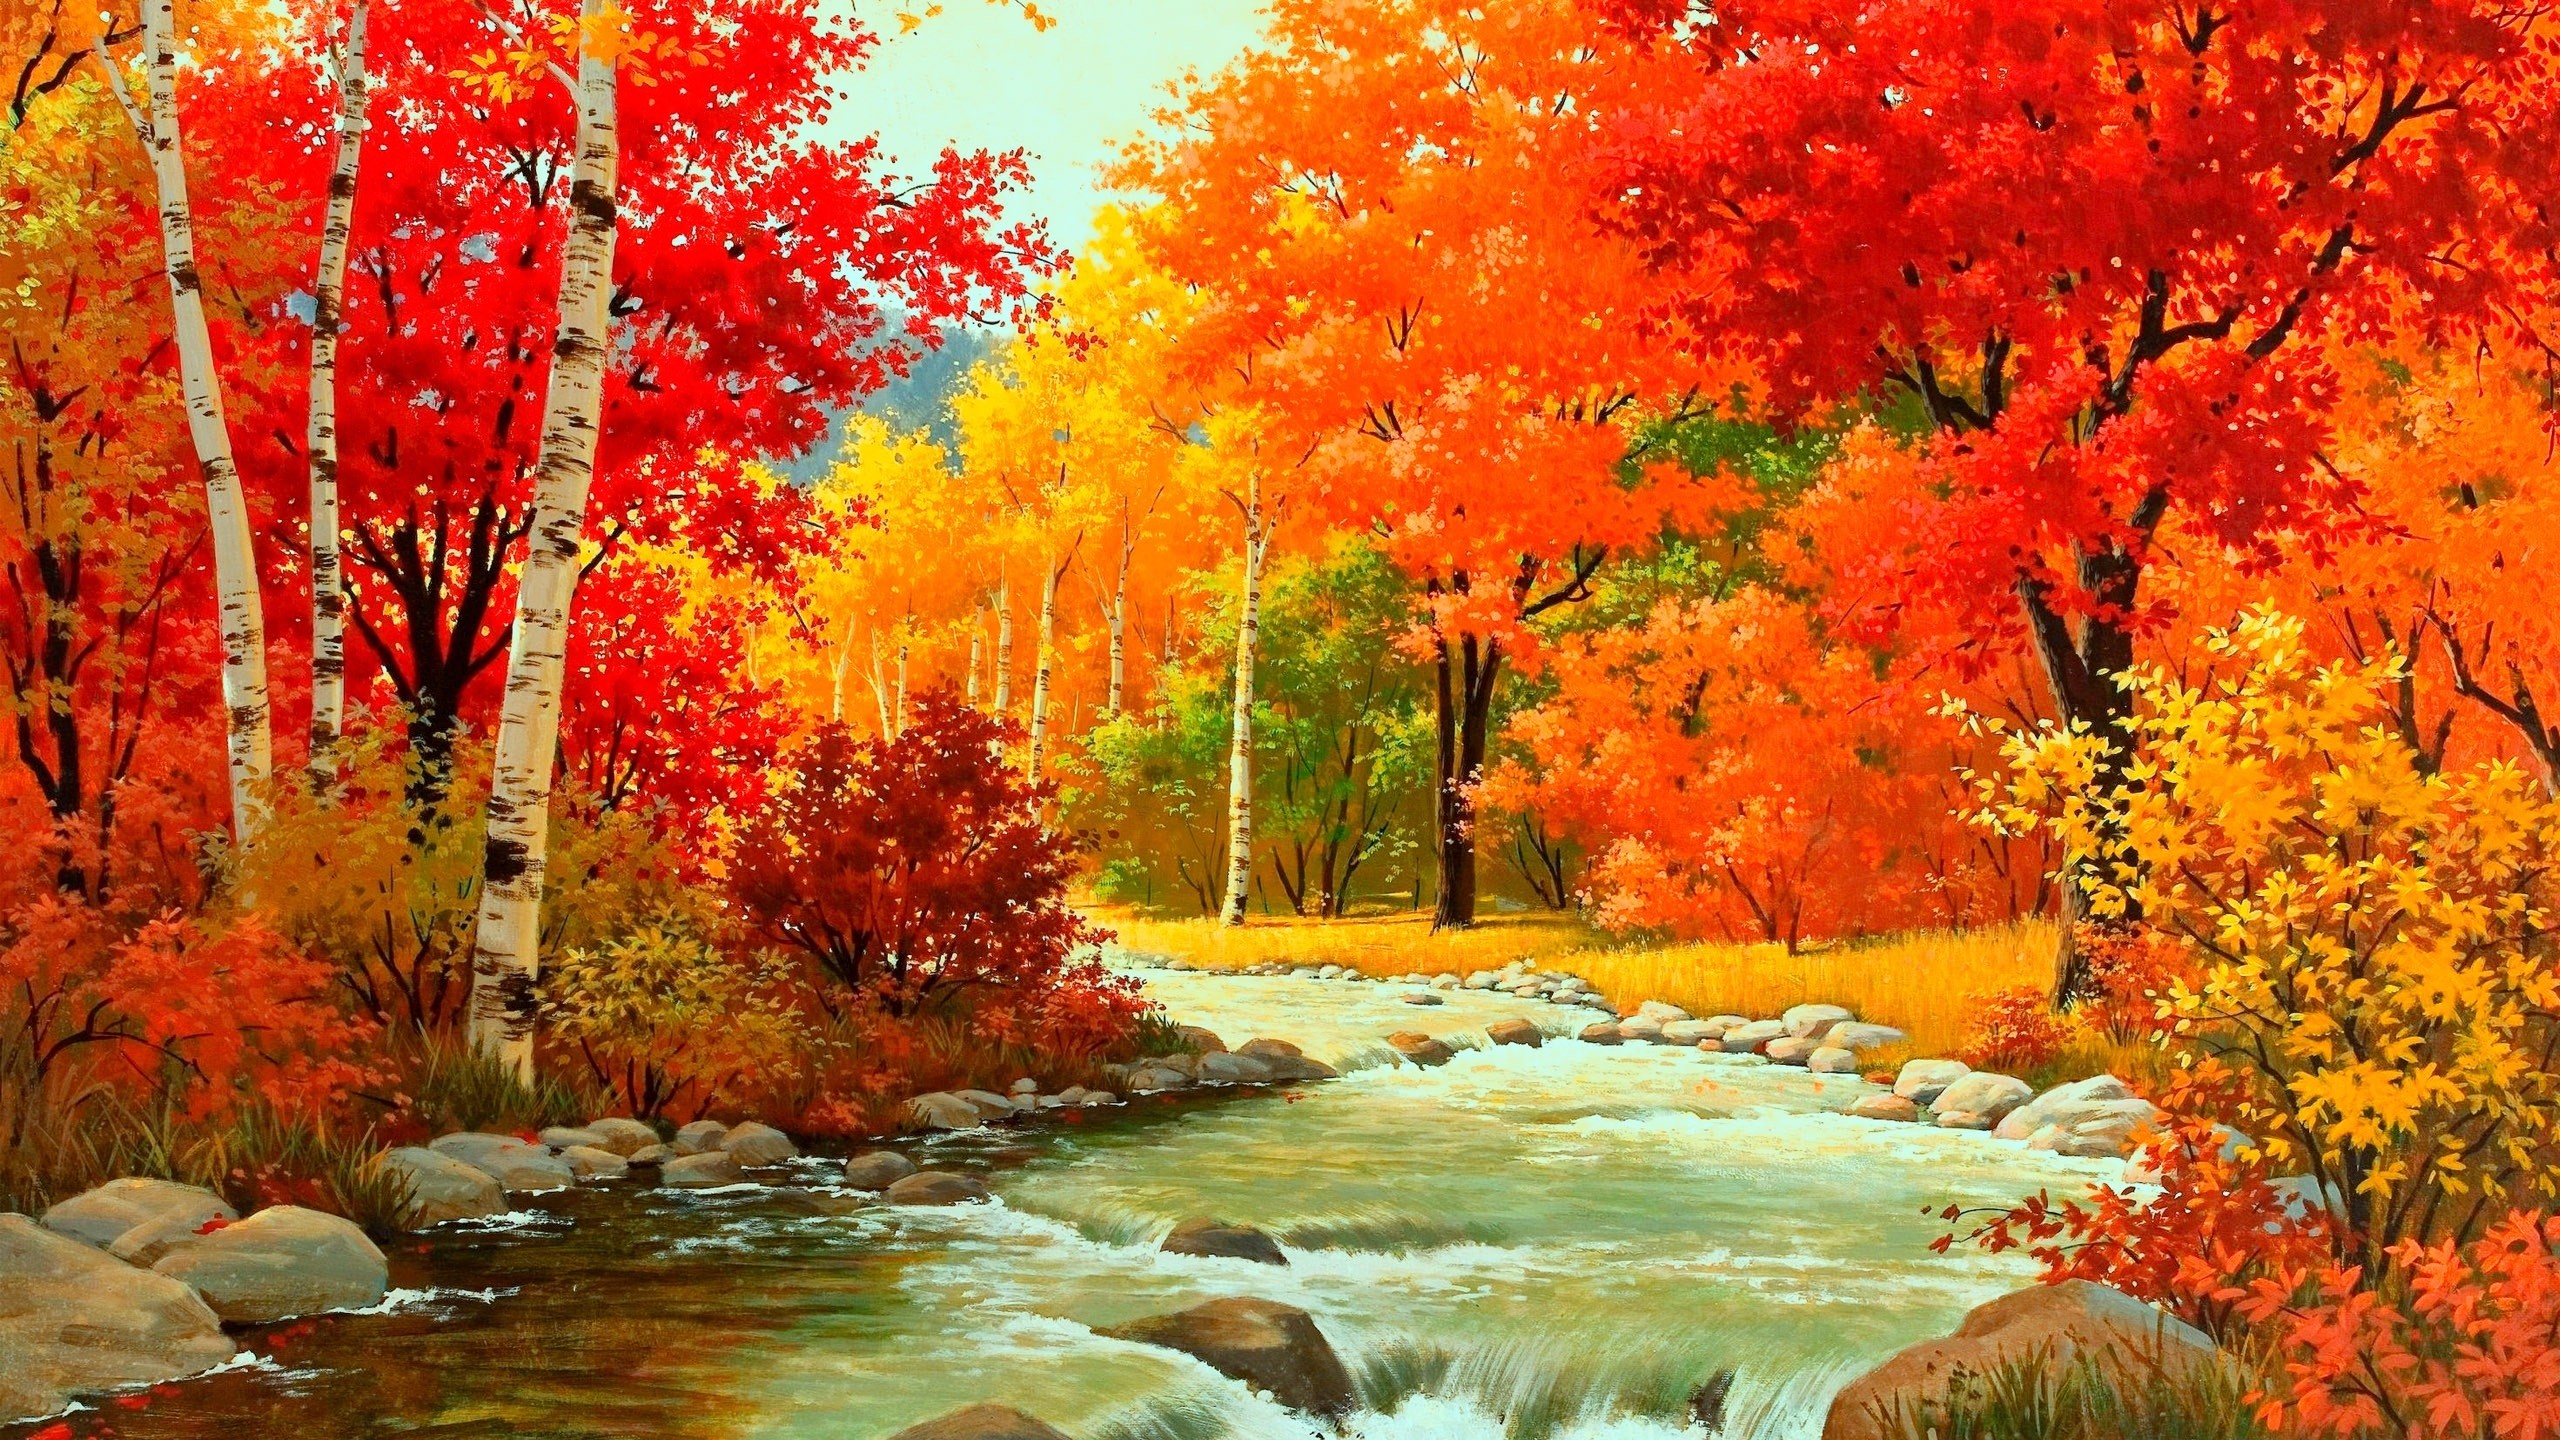 2560x1440 wallpaperlite Creative Autumn Wallpapers ideas Autumn Wallpapers HD, Desktop  Backgrounds, Images and Pictures 